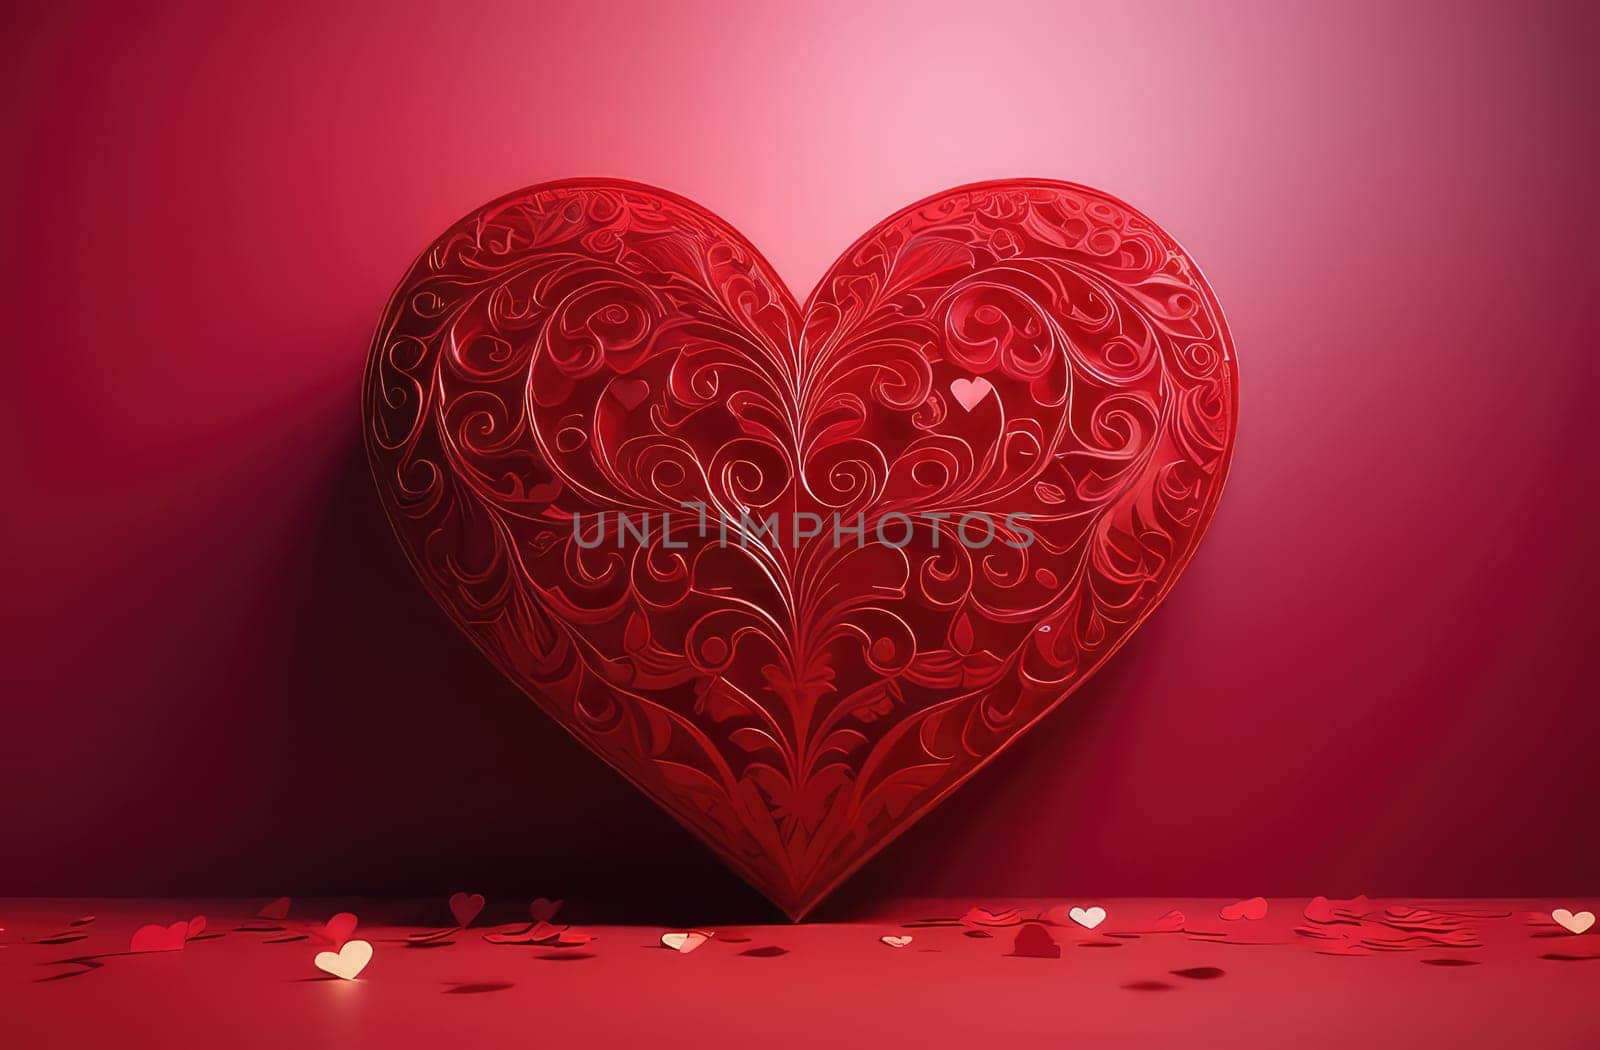 St. Valentines day, wedding banner with red ornamental heart on red background. Use for love sale banner, voucher, greeting card. Copy space. Beautiful love background for valentines day greeting card